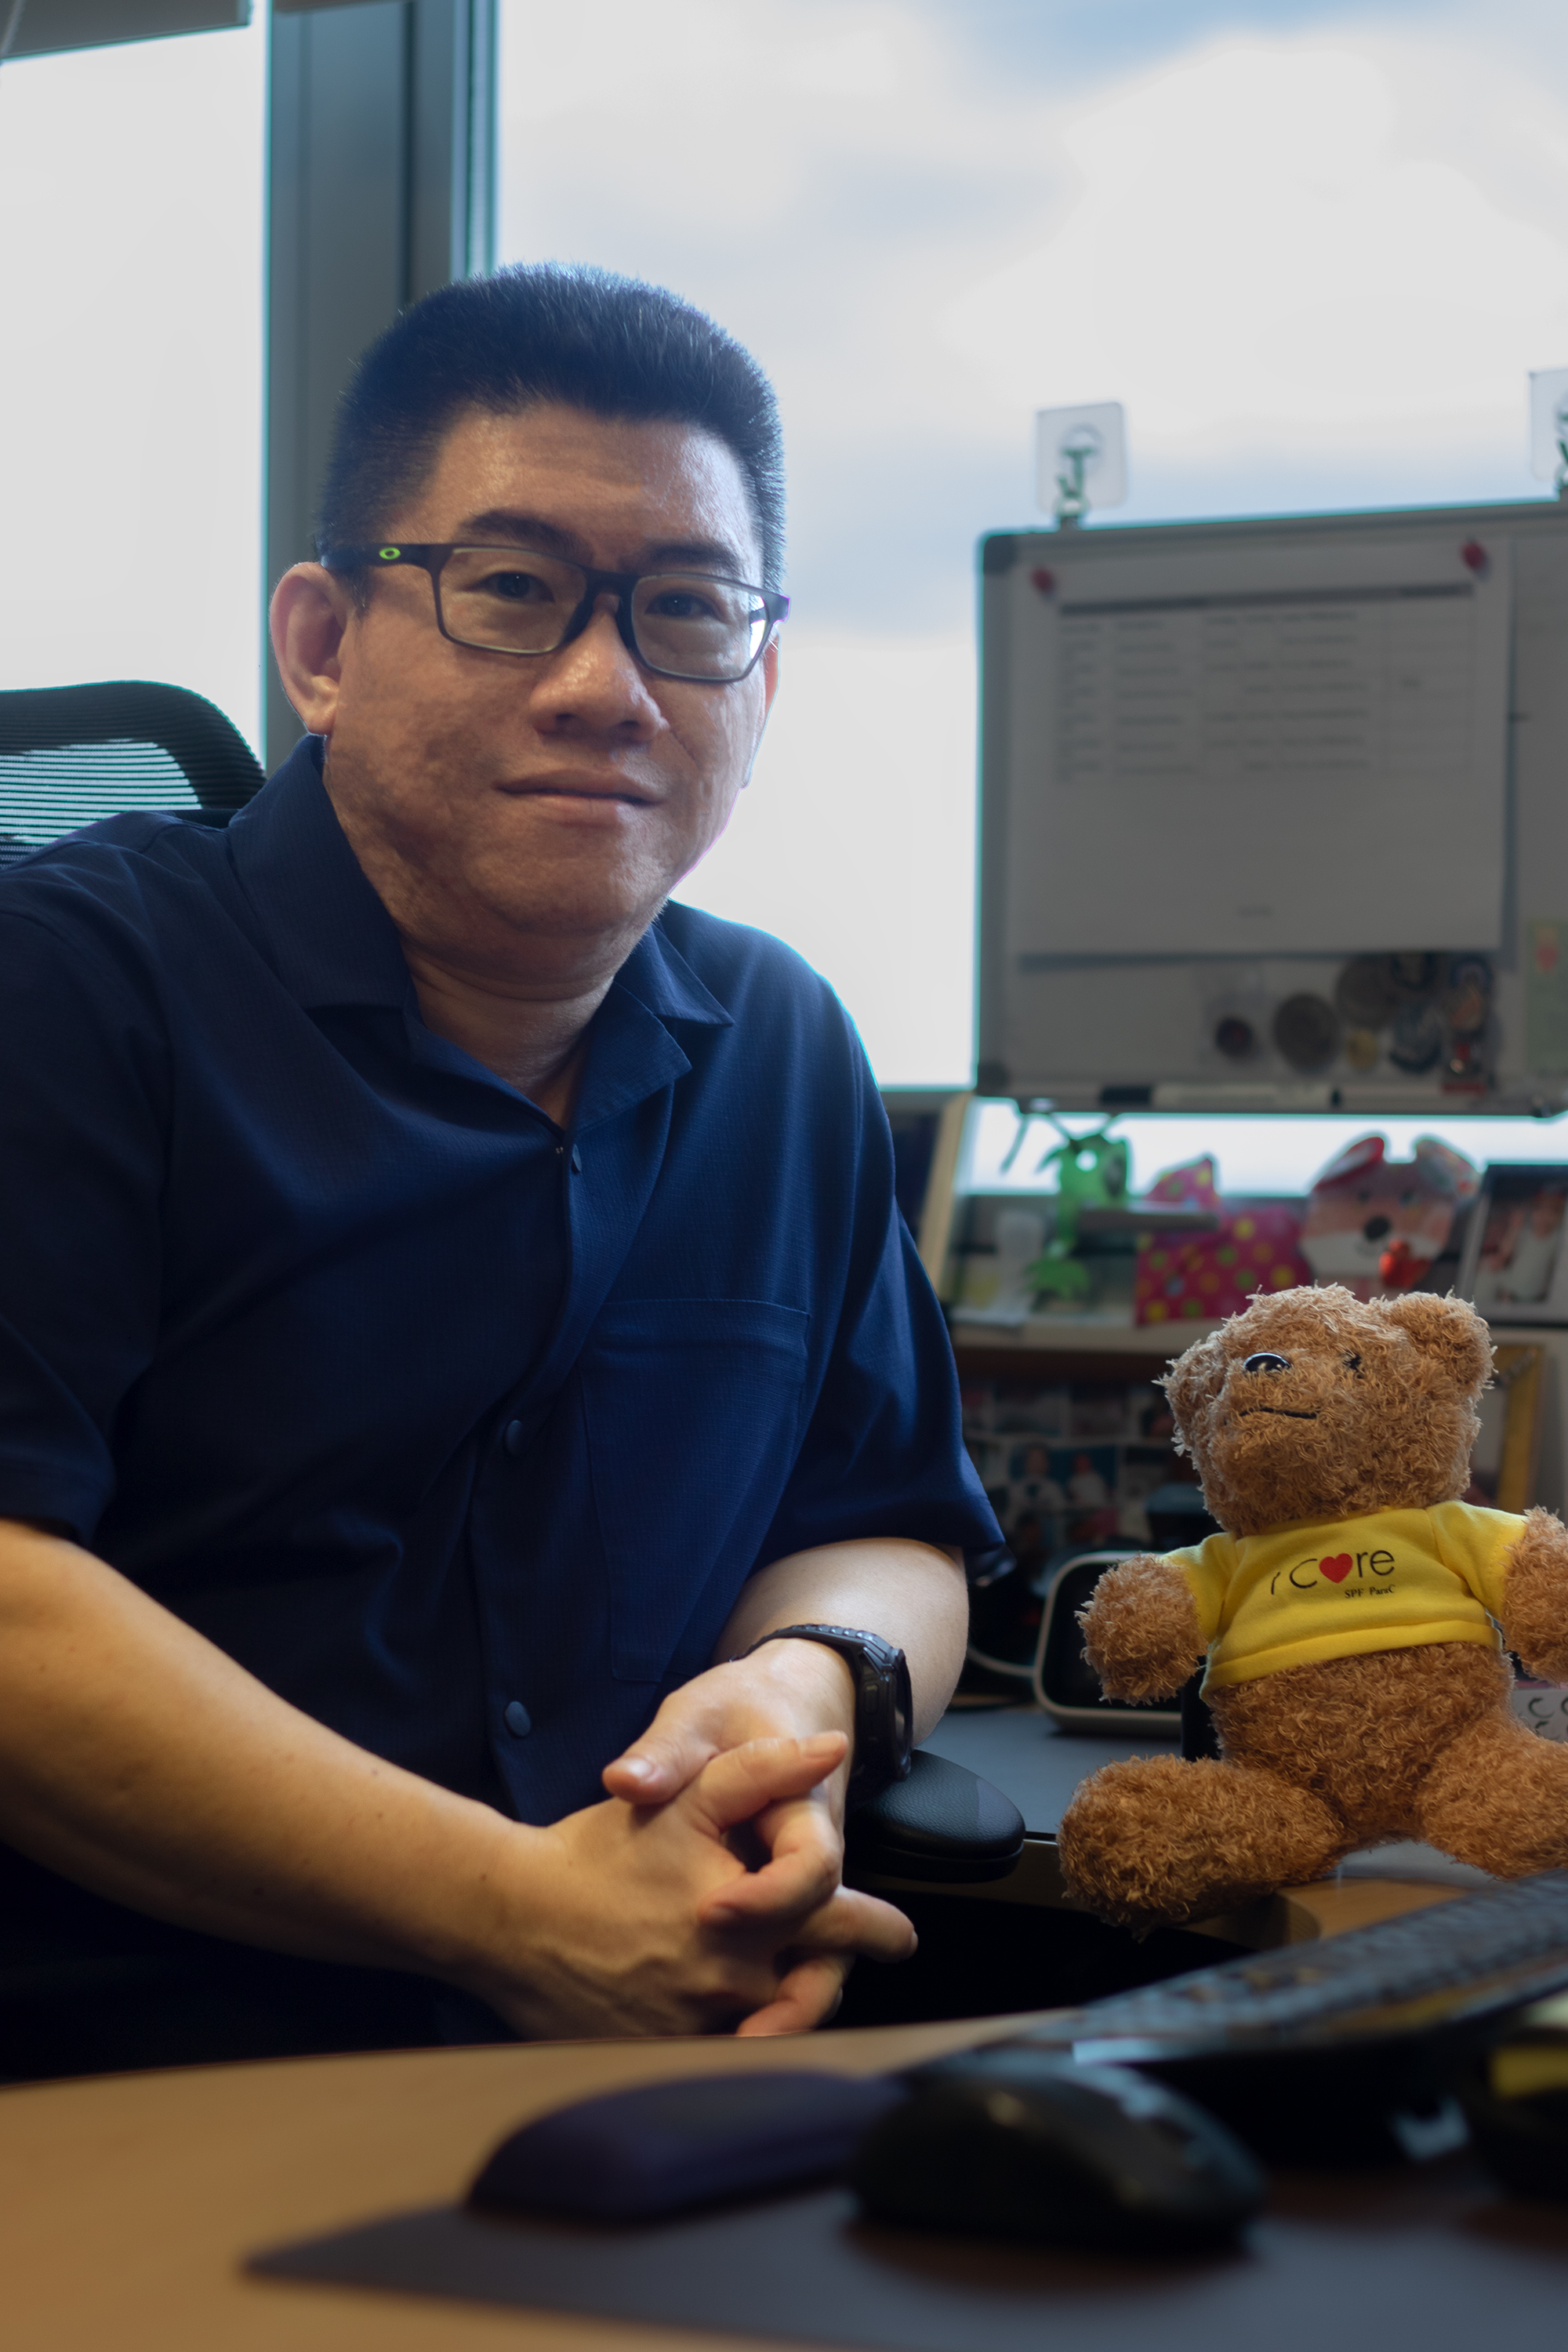 DAC Teo believes in the importance of looking out for fellow officers through everyday interactions.